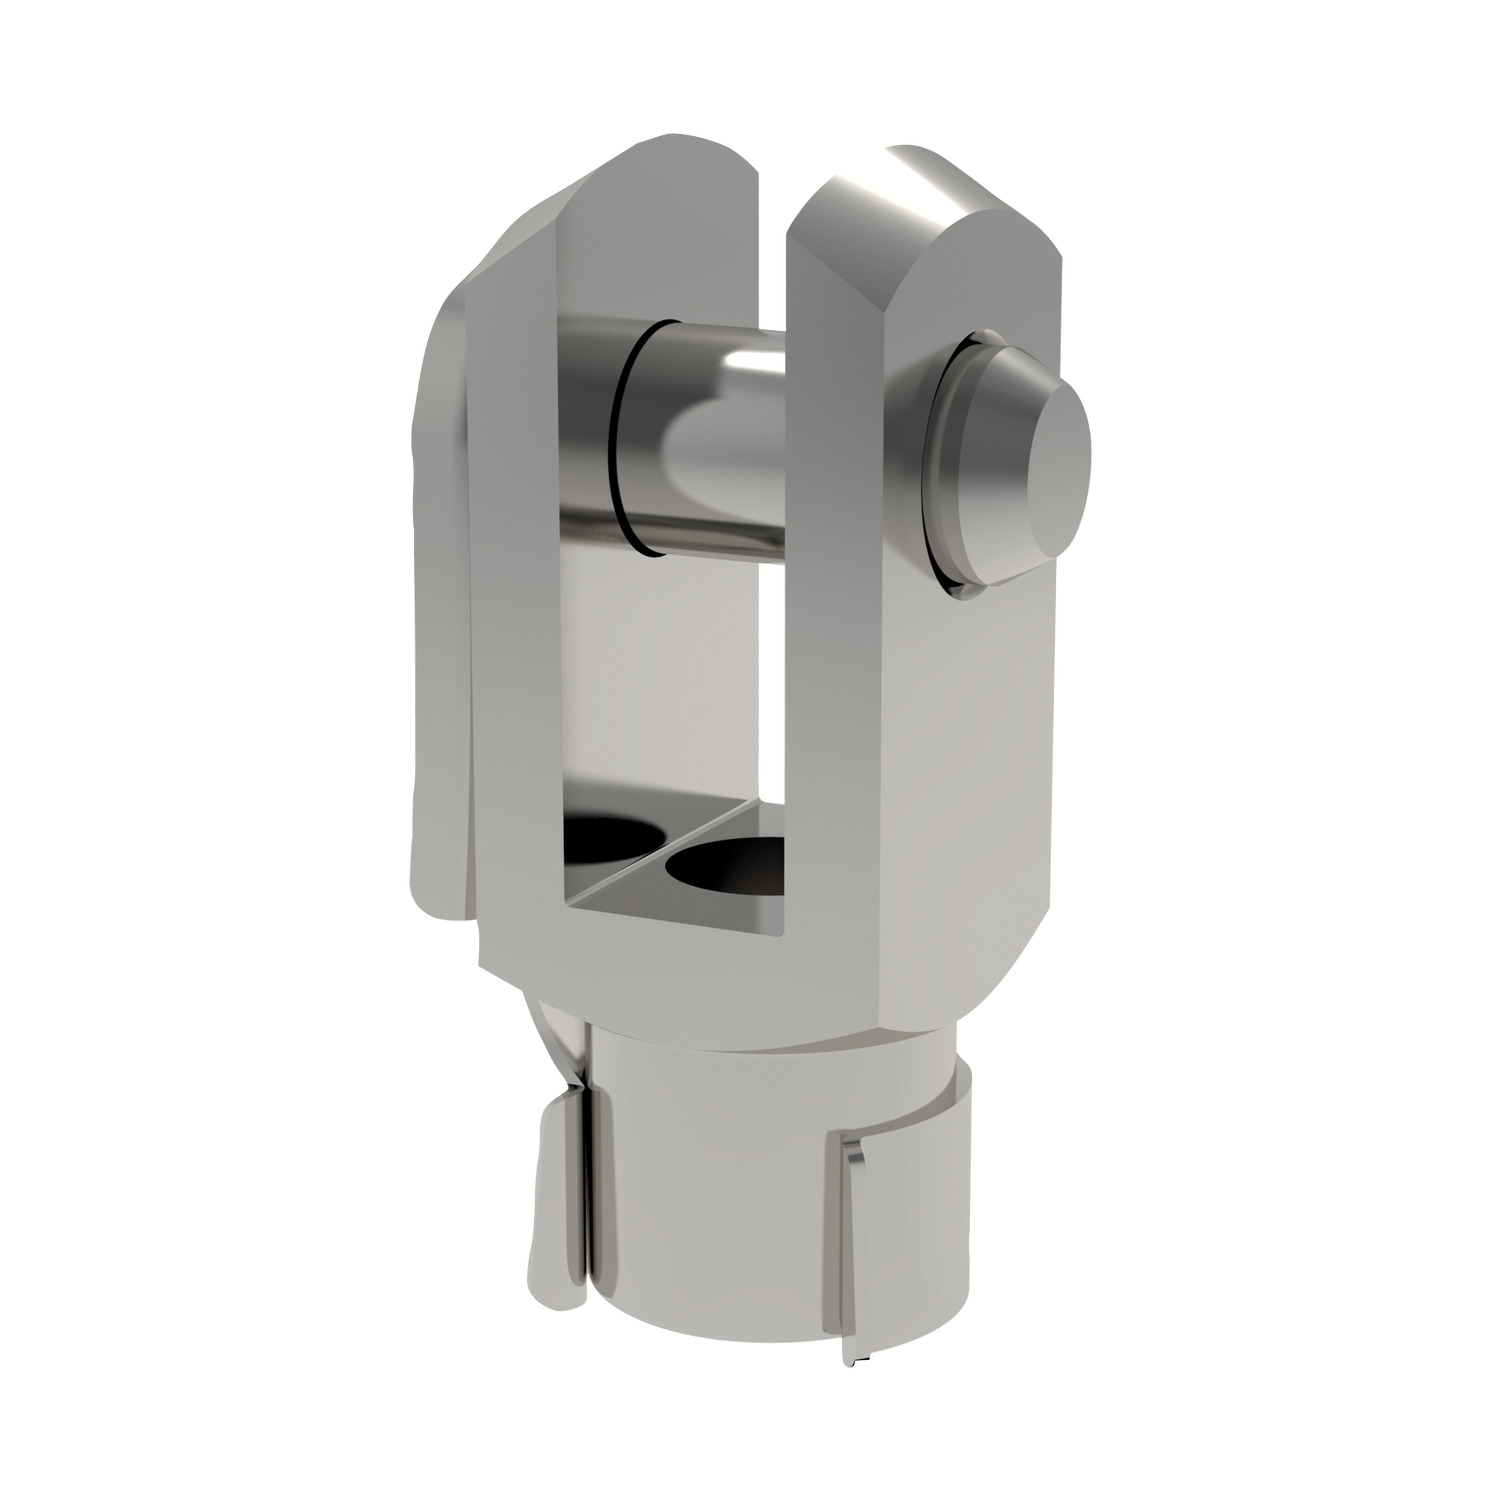 Product R3401, LH Clevis Joints with Retention Clip S/S stainless steel / 